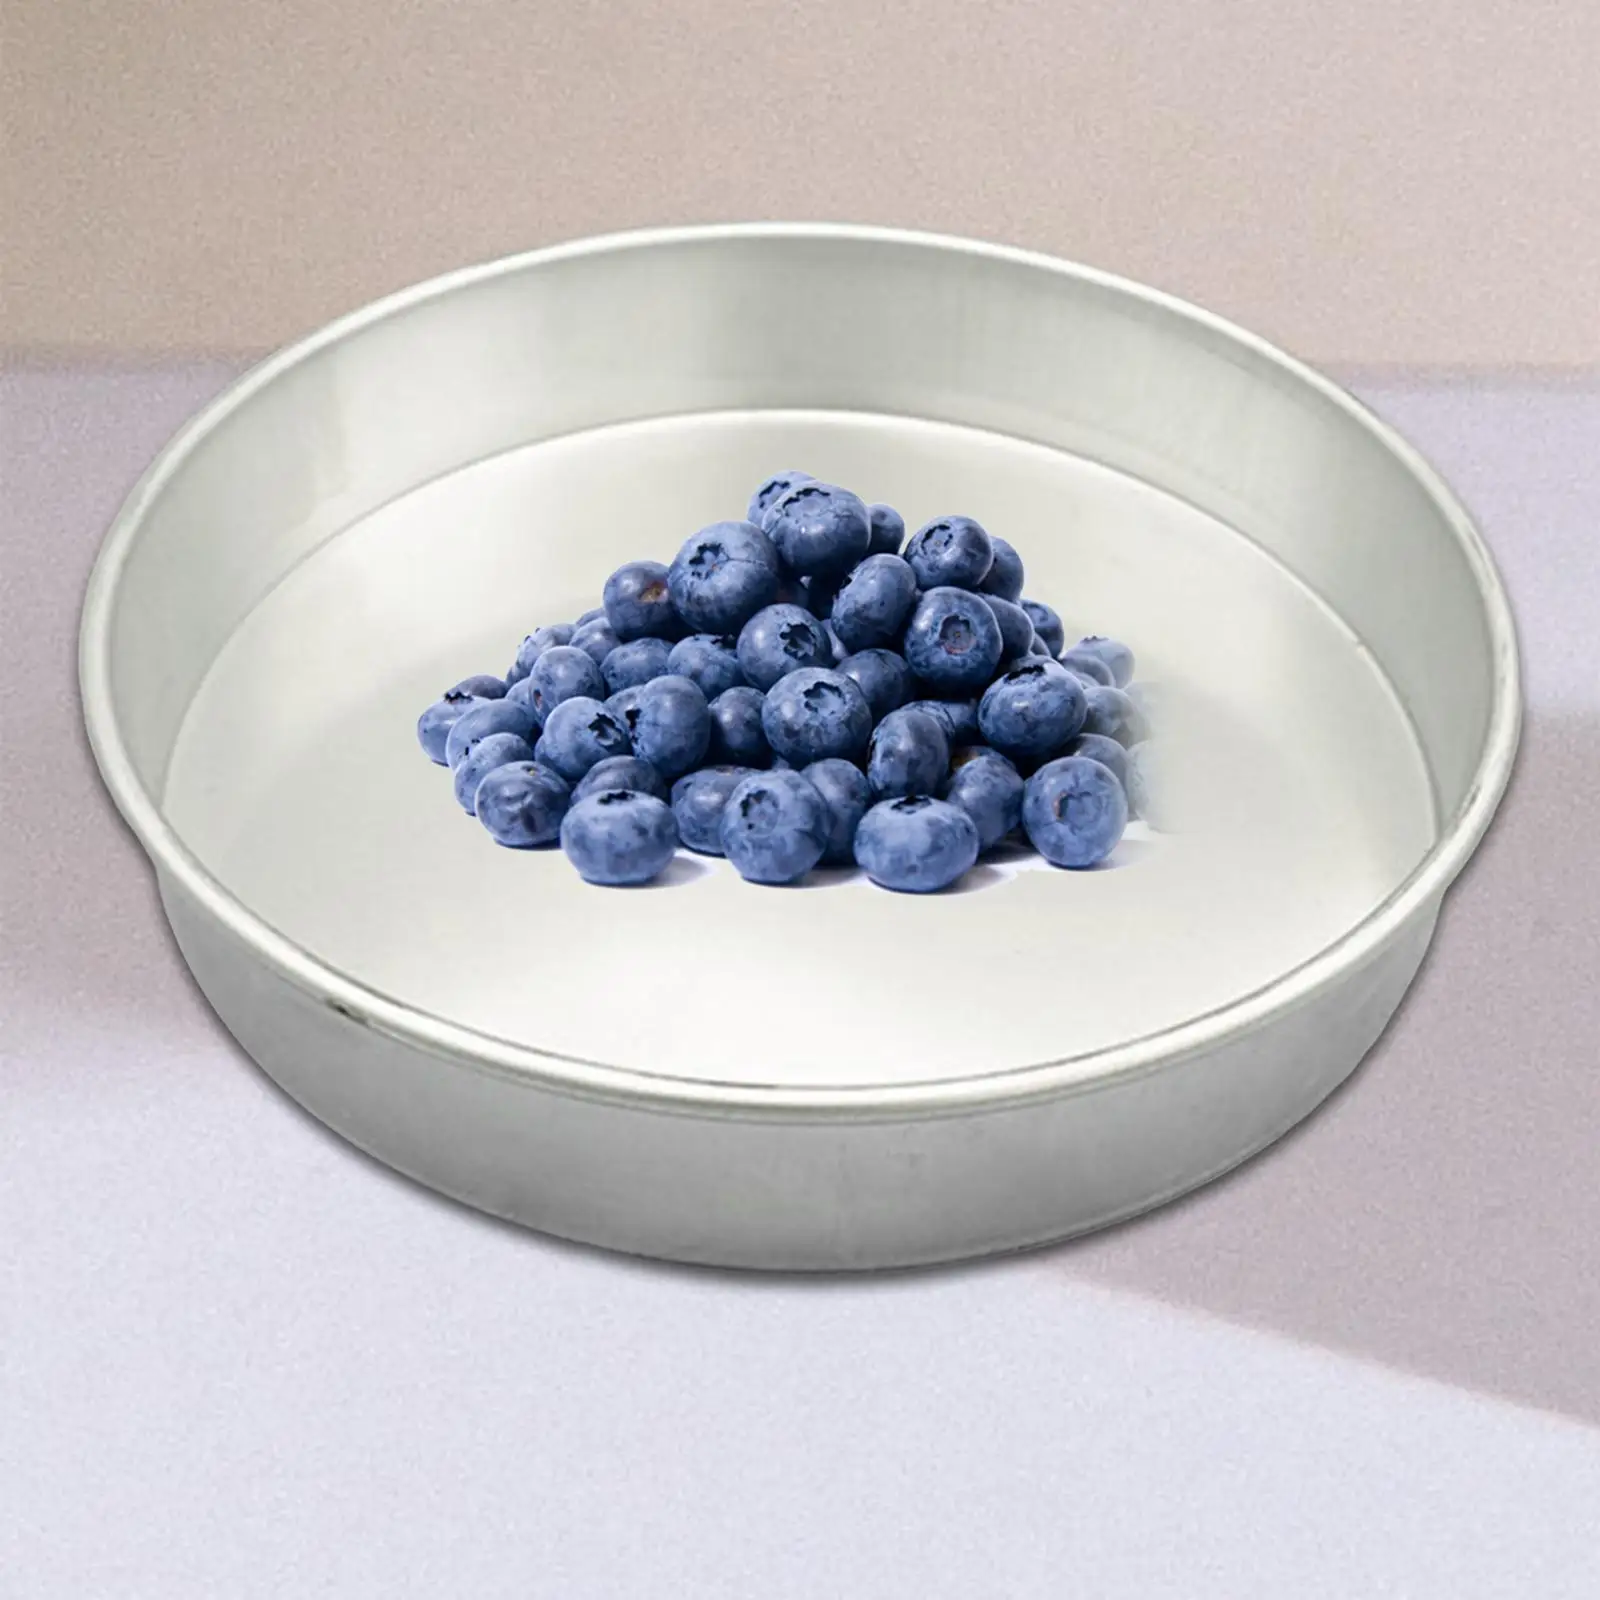 Garden Serving Tray Storage Portable Blueberry Storage Pan for Home Planting